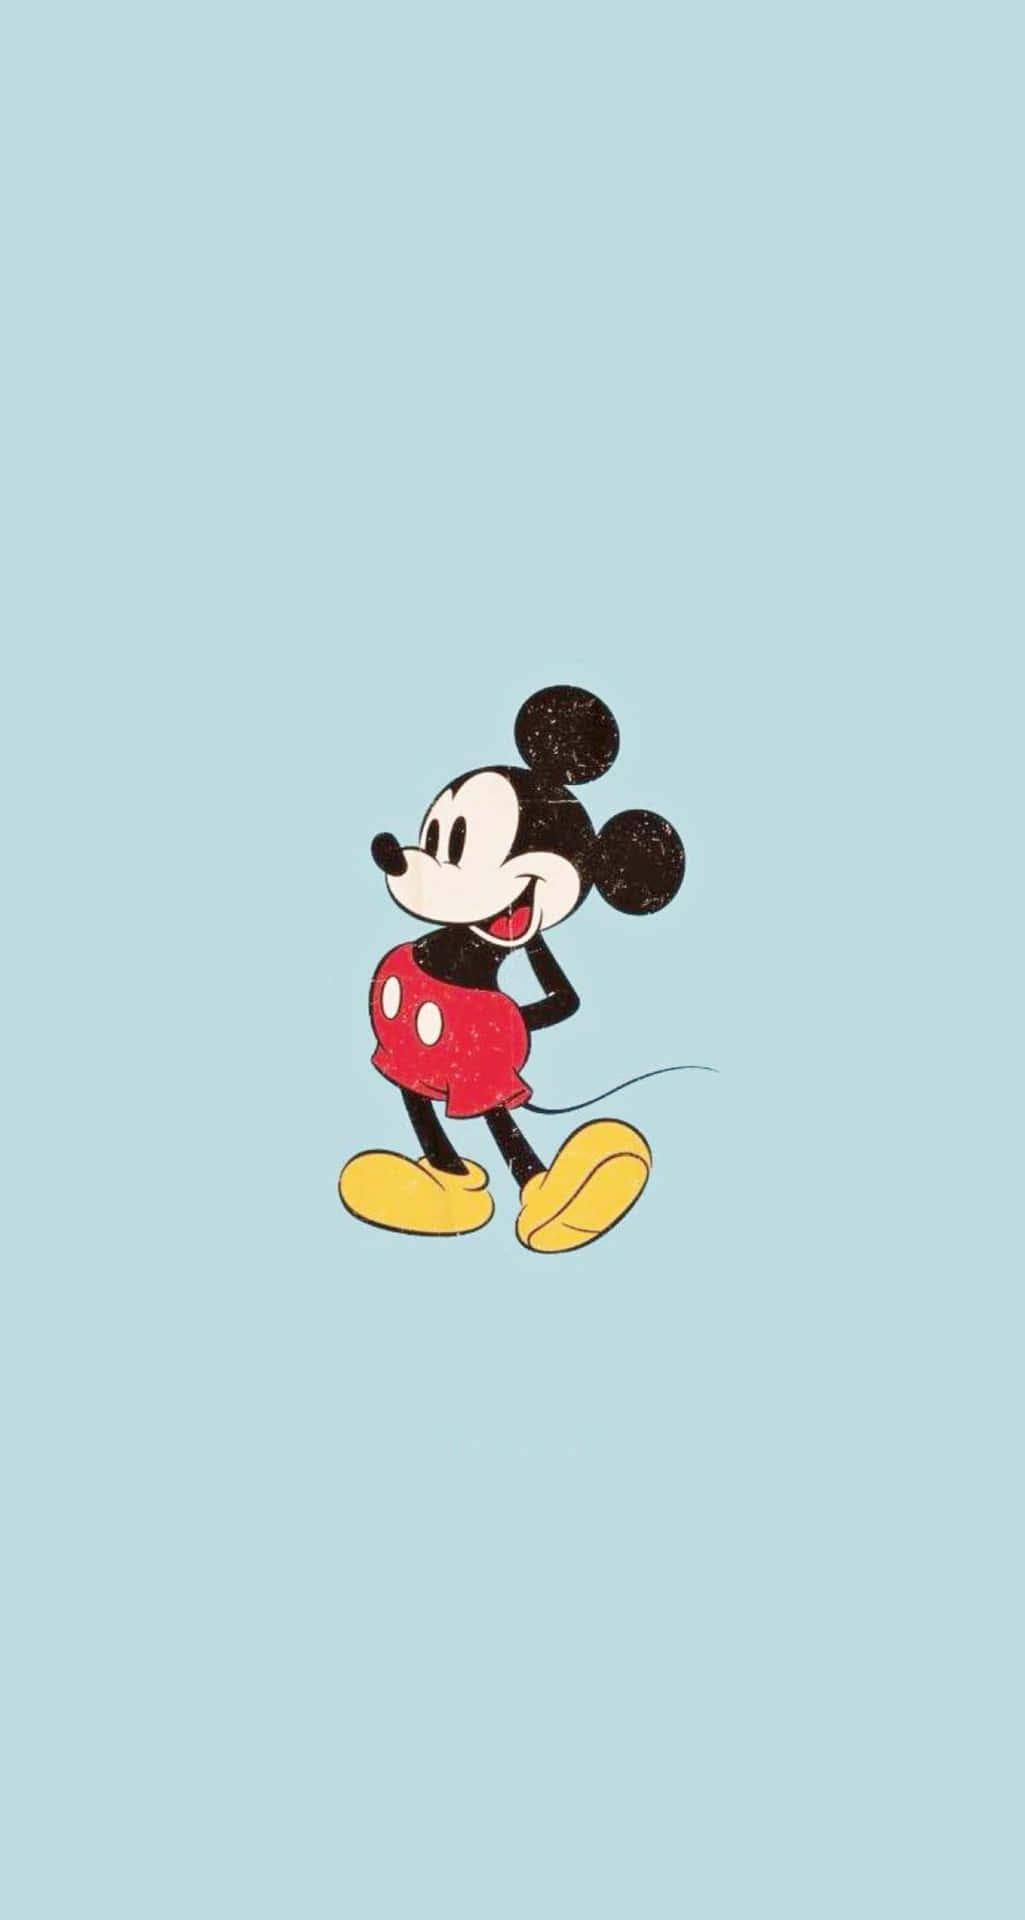 “Make way for the cutest mouse in town - adorable Mickey Mouse!” Wallpaper